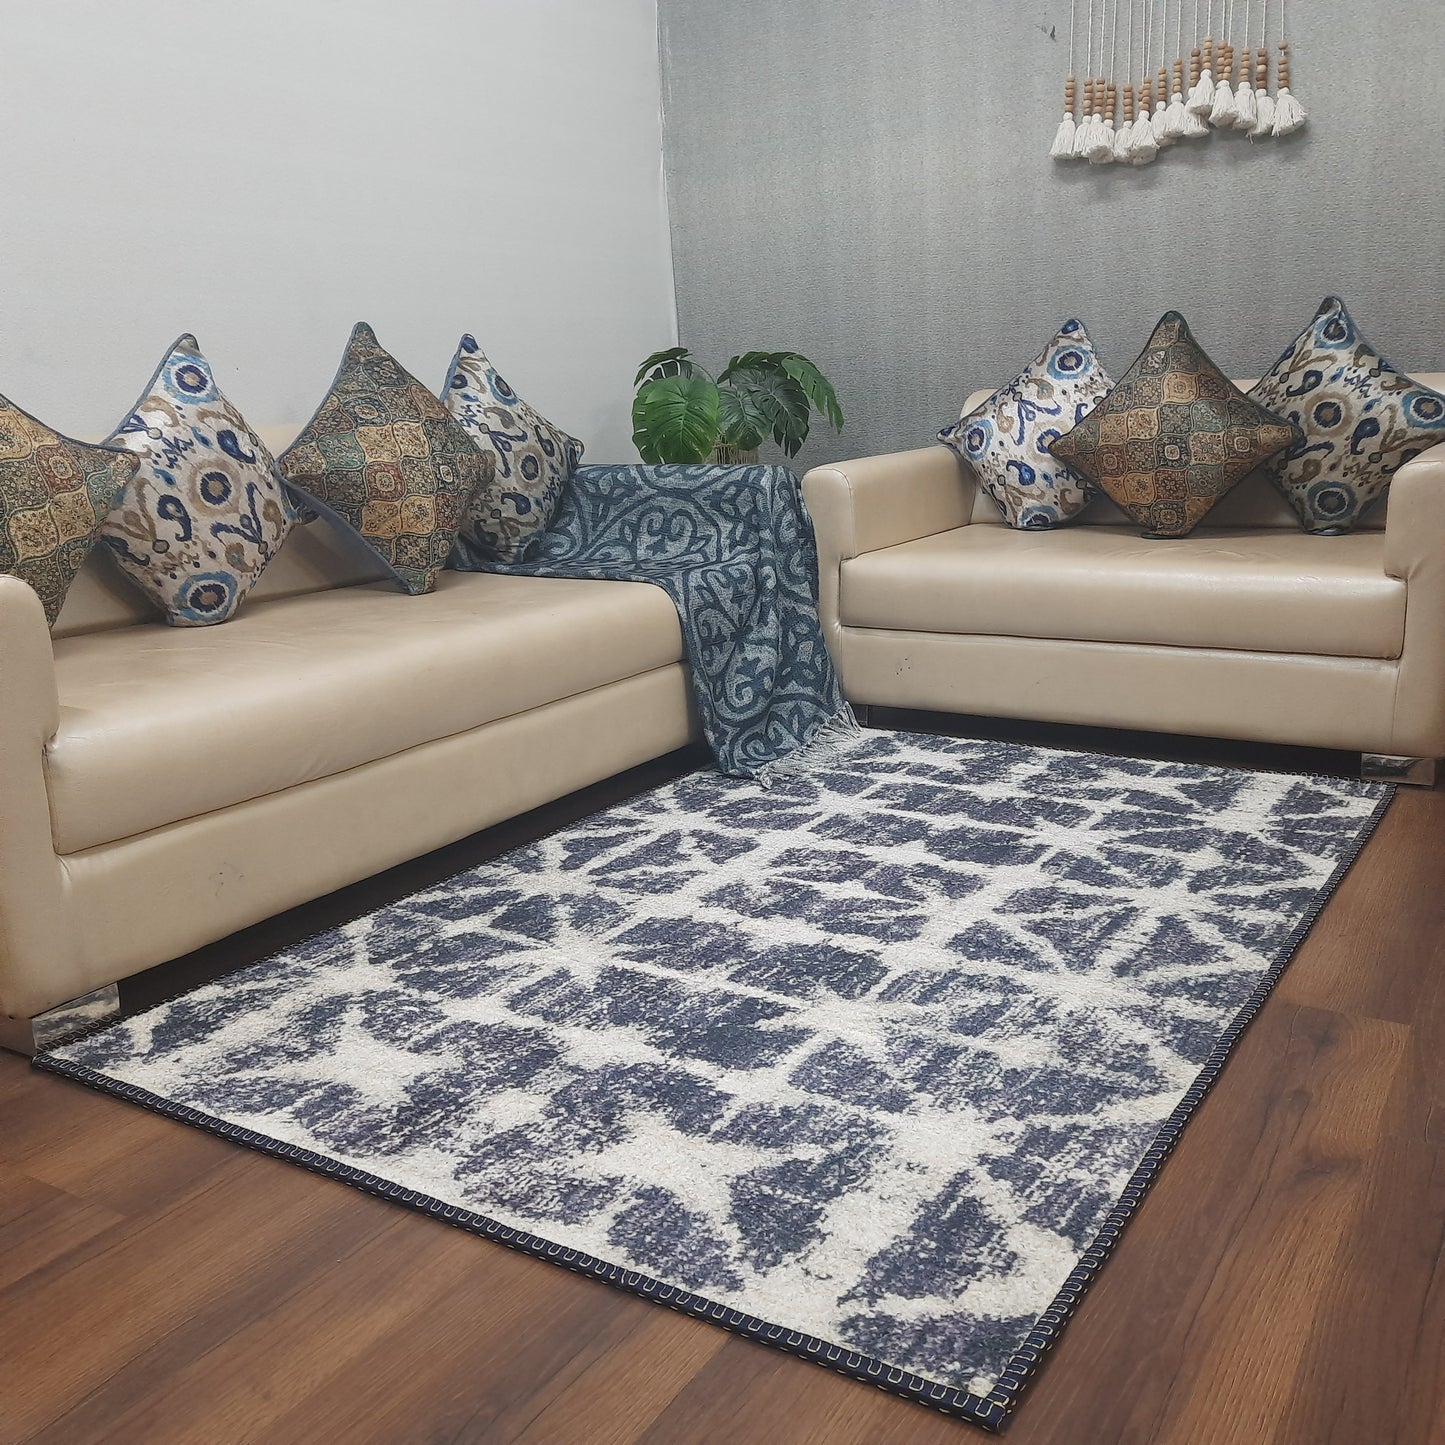 Avioni Faux Silk Carpet for a Stylish and Modern Living Room Vintage theme | Durable and Washable